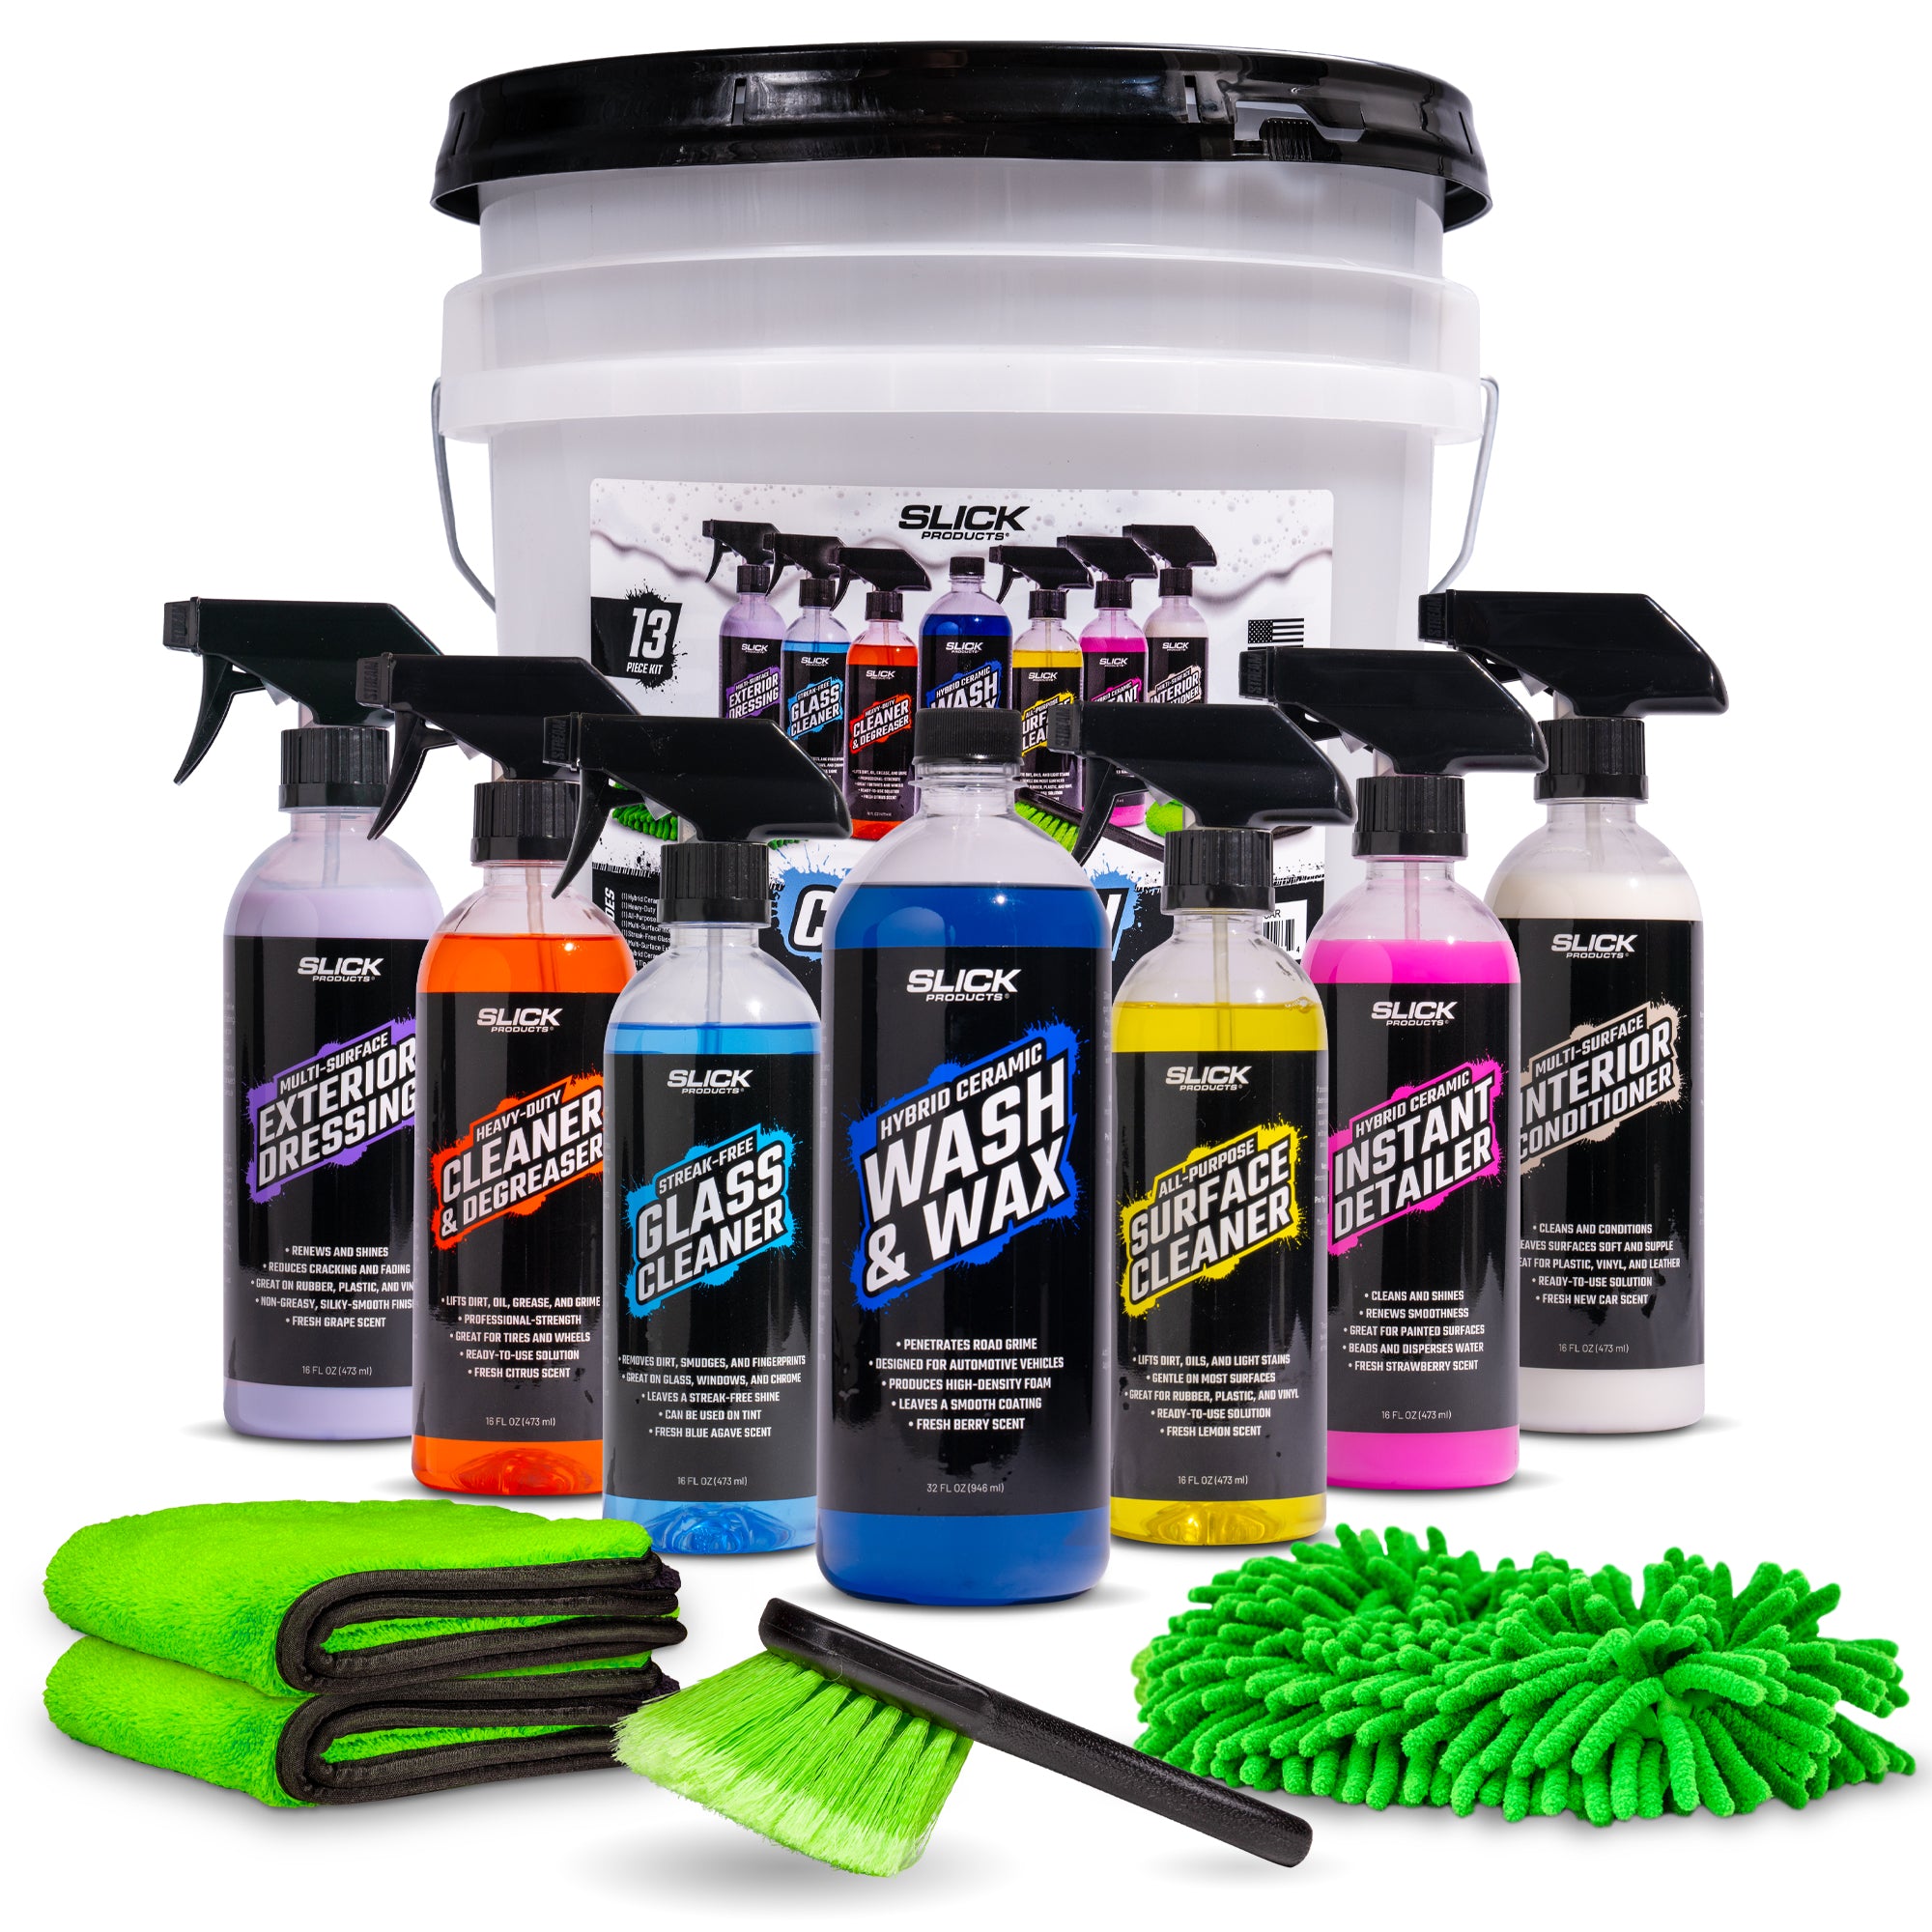 Free $25 Gift Voucher + 25% Off Wash & Detail Kits - Slick Products